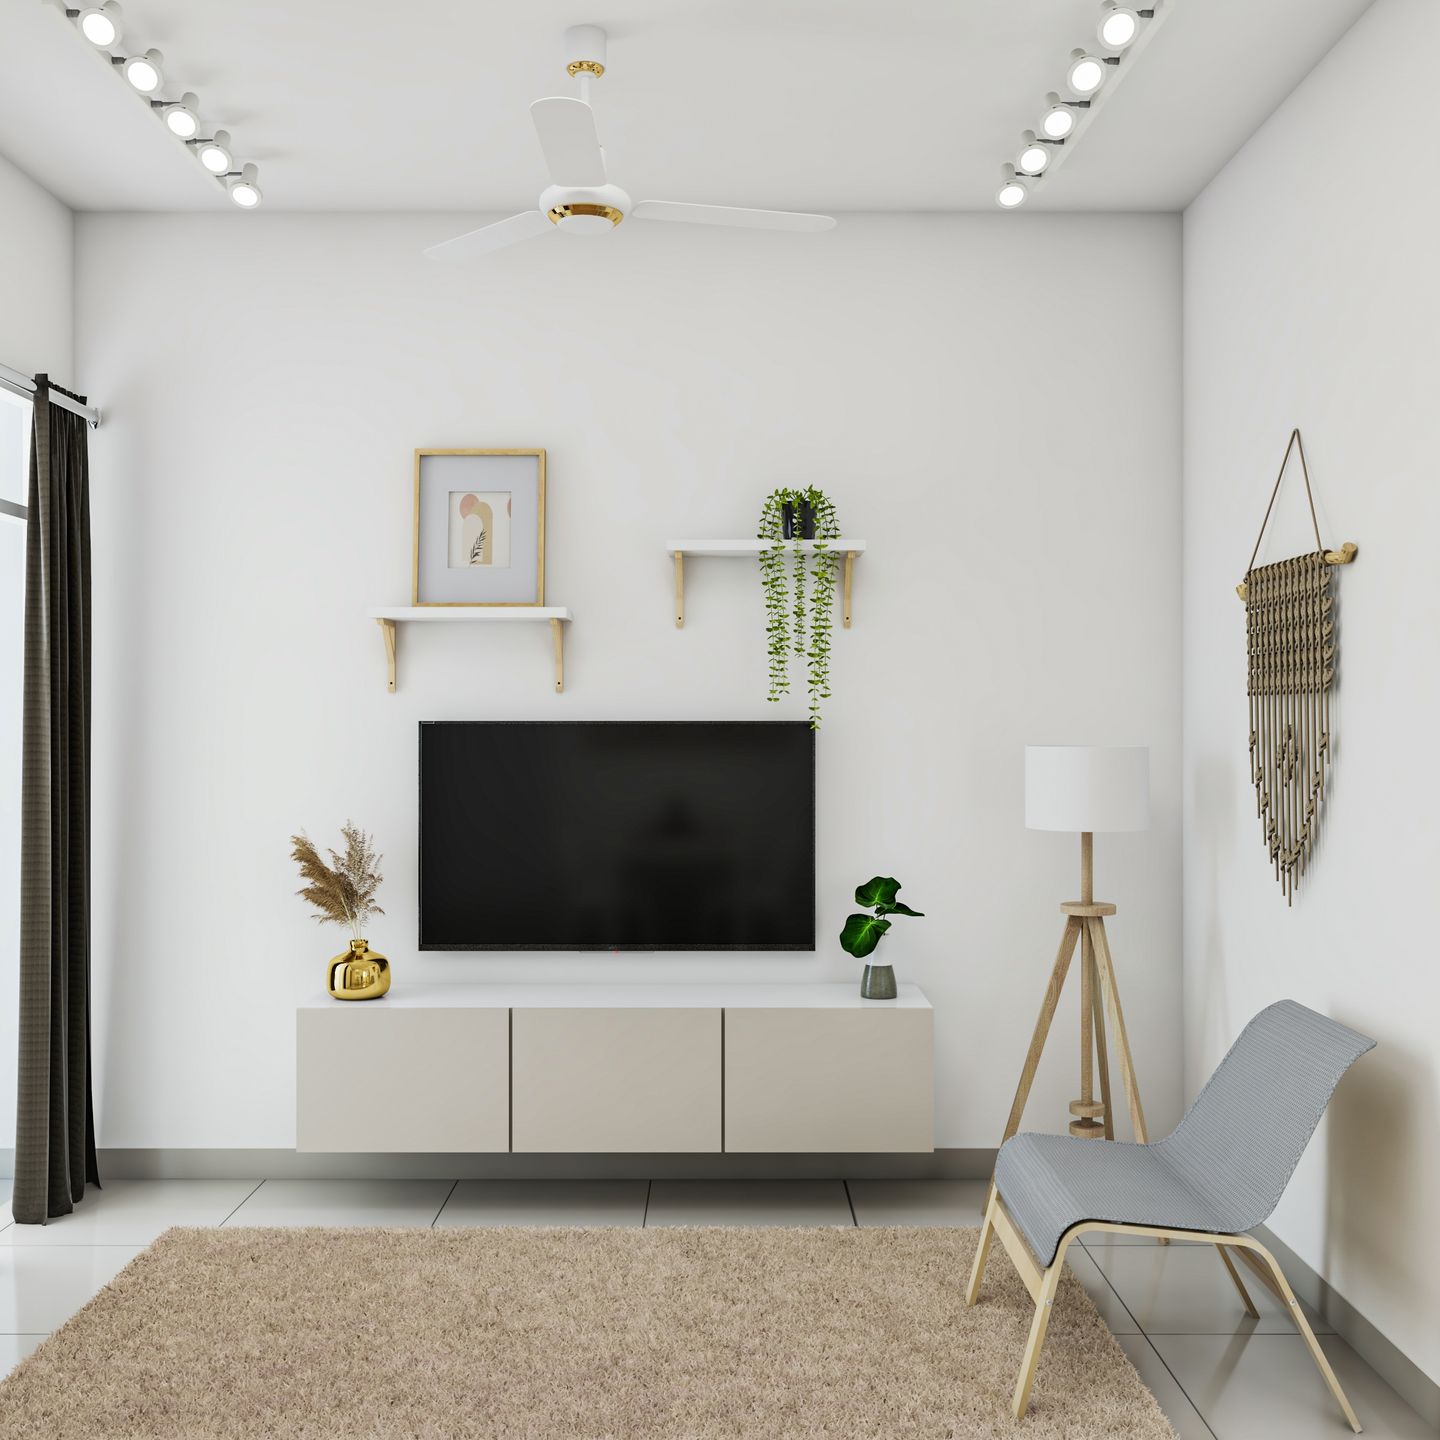 Living Room With TV Unit - Livspace